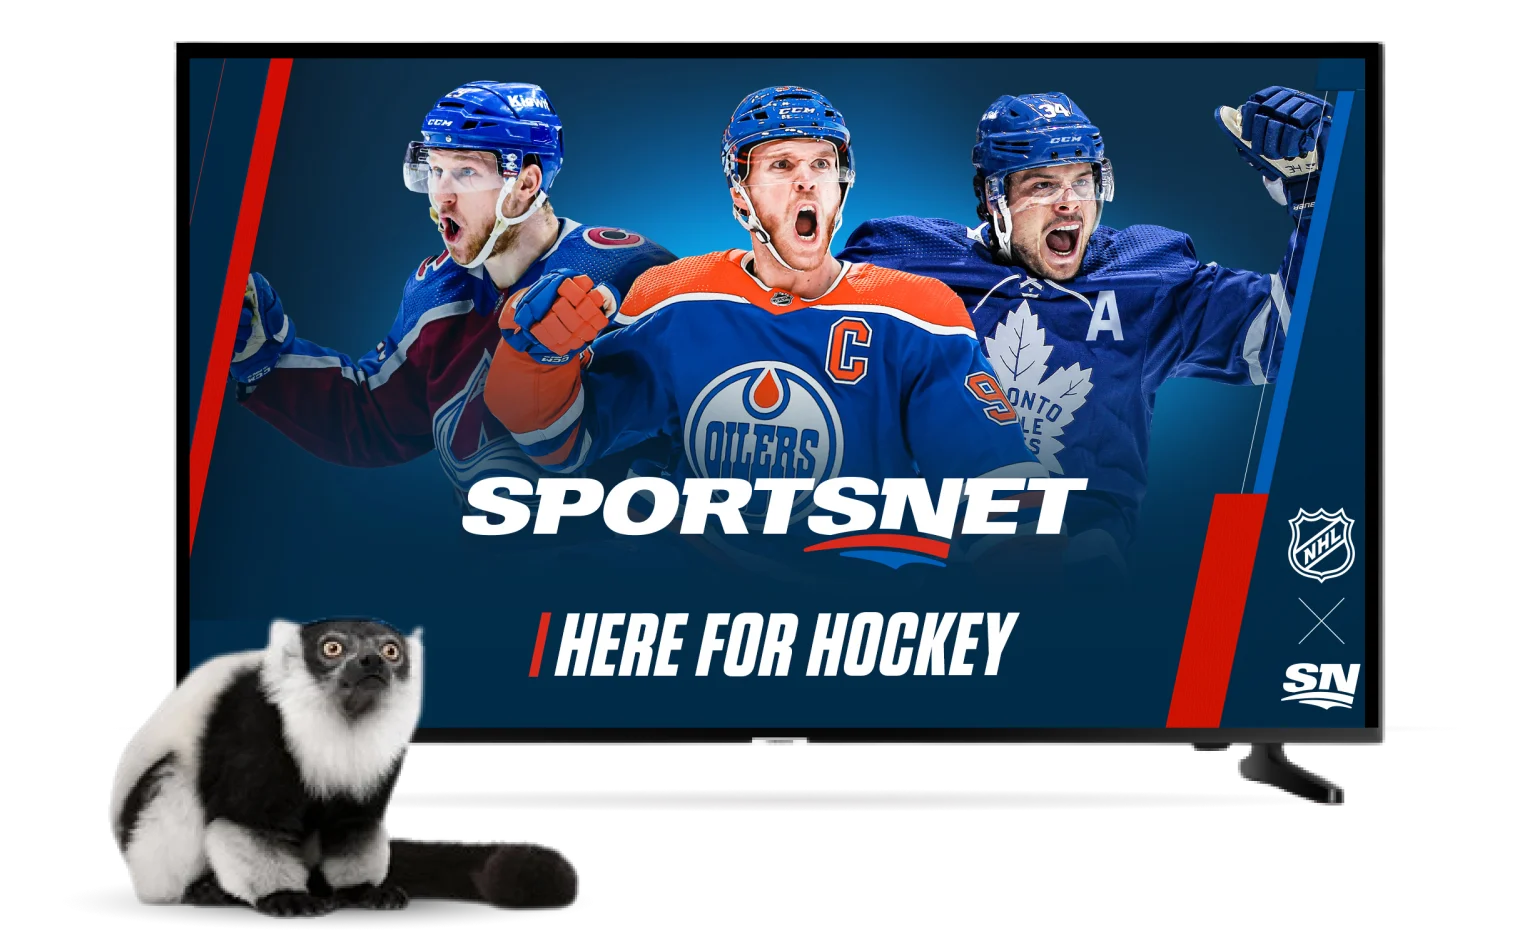 On a TV, three hockey players in different uniforms scream enthusiastically as a terrified lemur watches. 